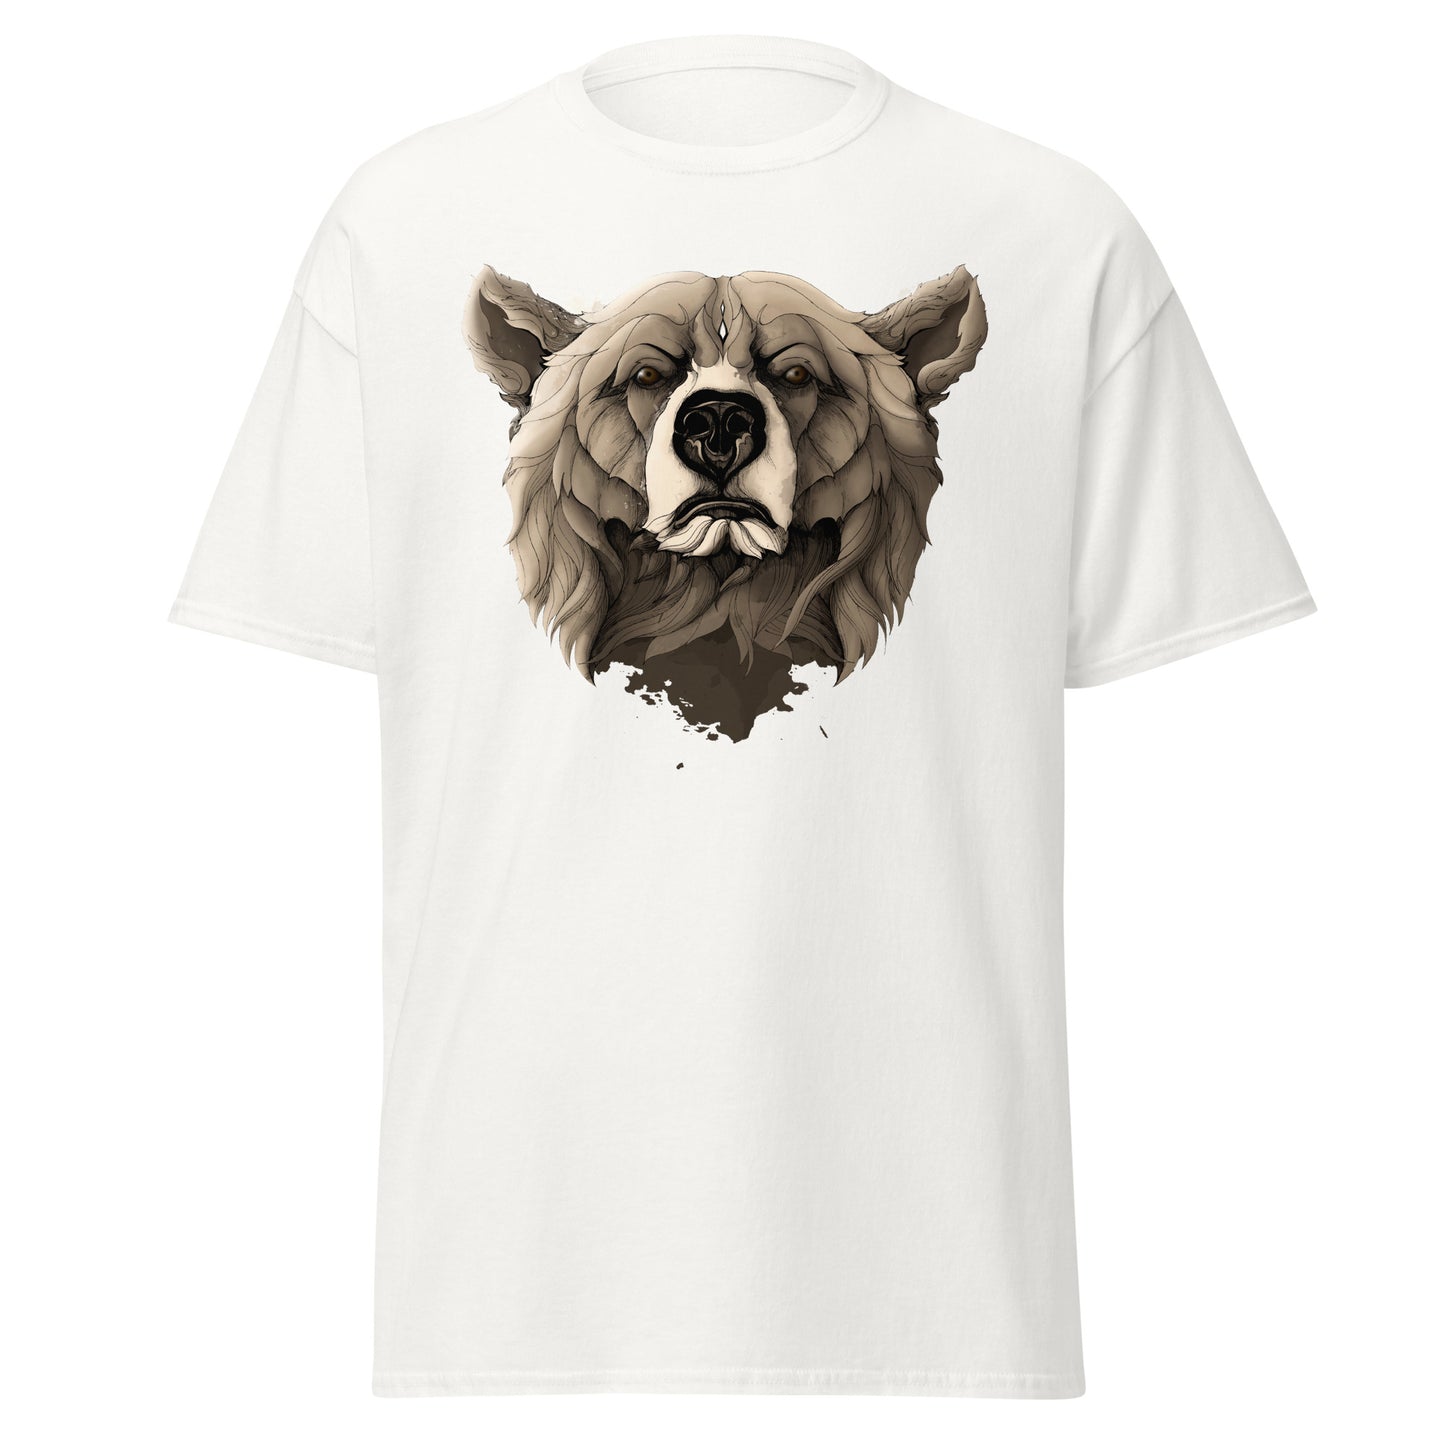 Grizzly bear t-shirt